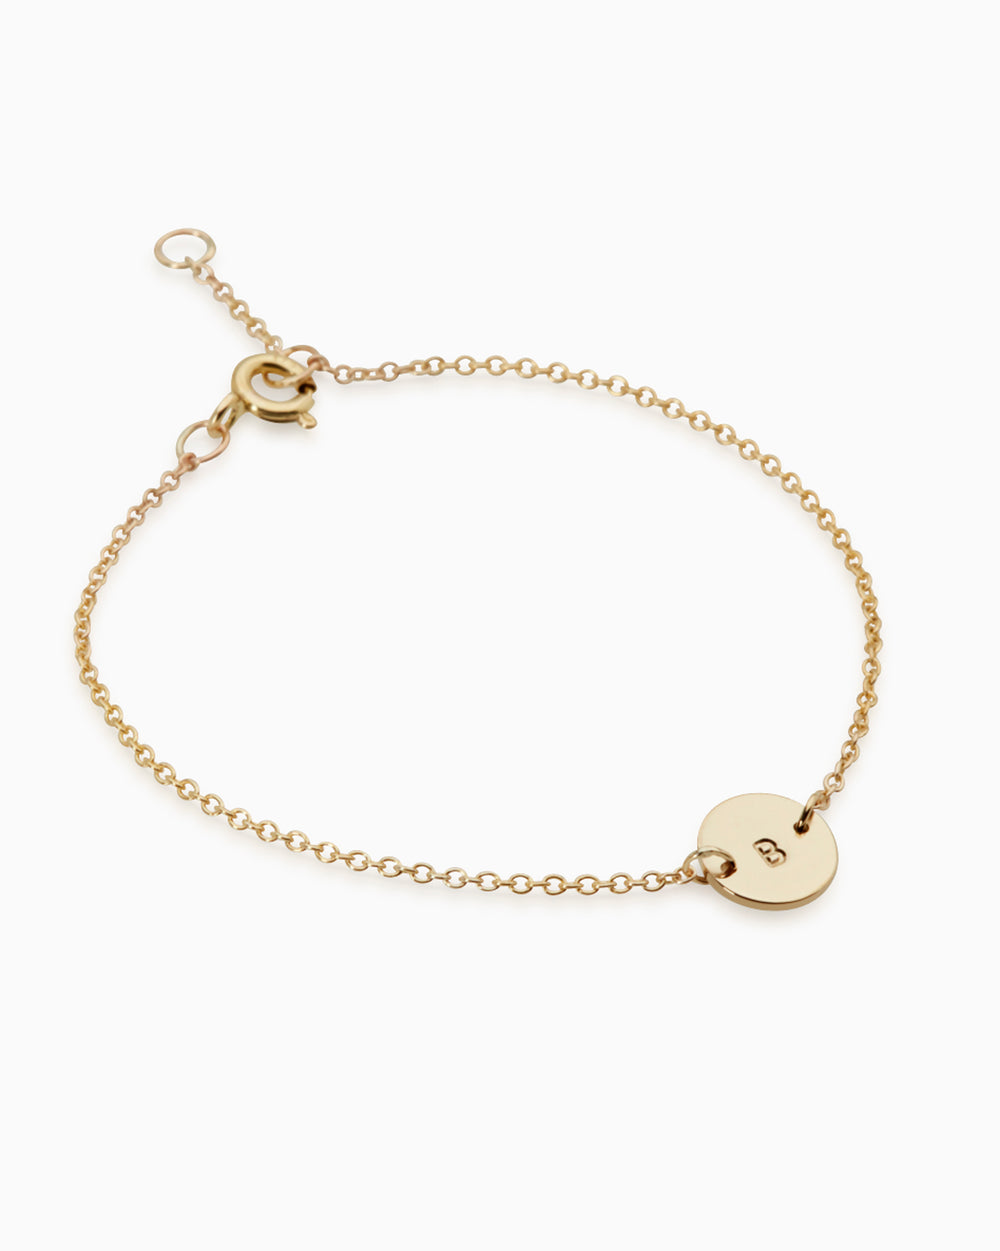 Personalised Plate Bracelet | Solid Yellow Gold